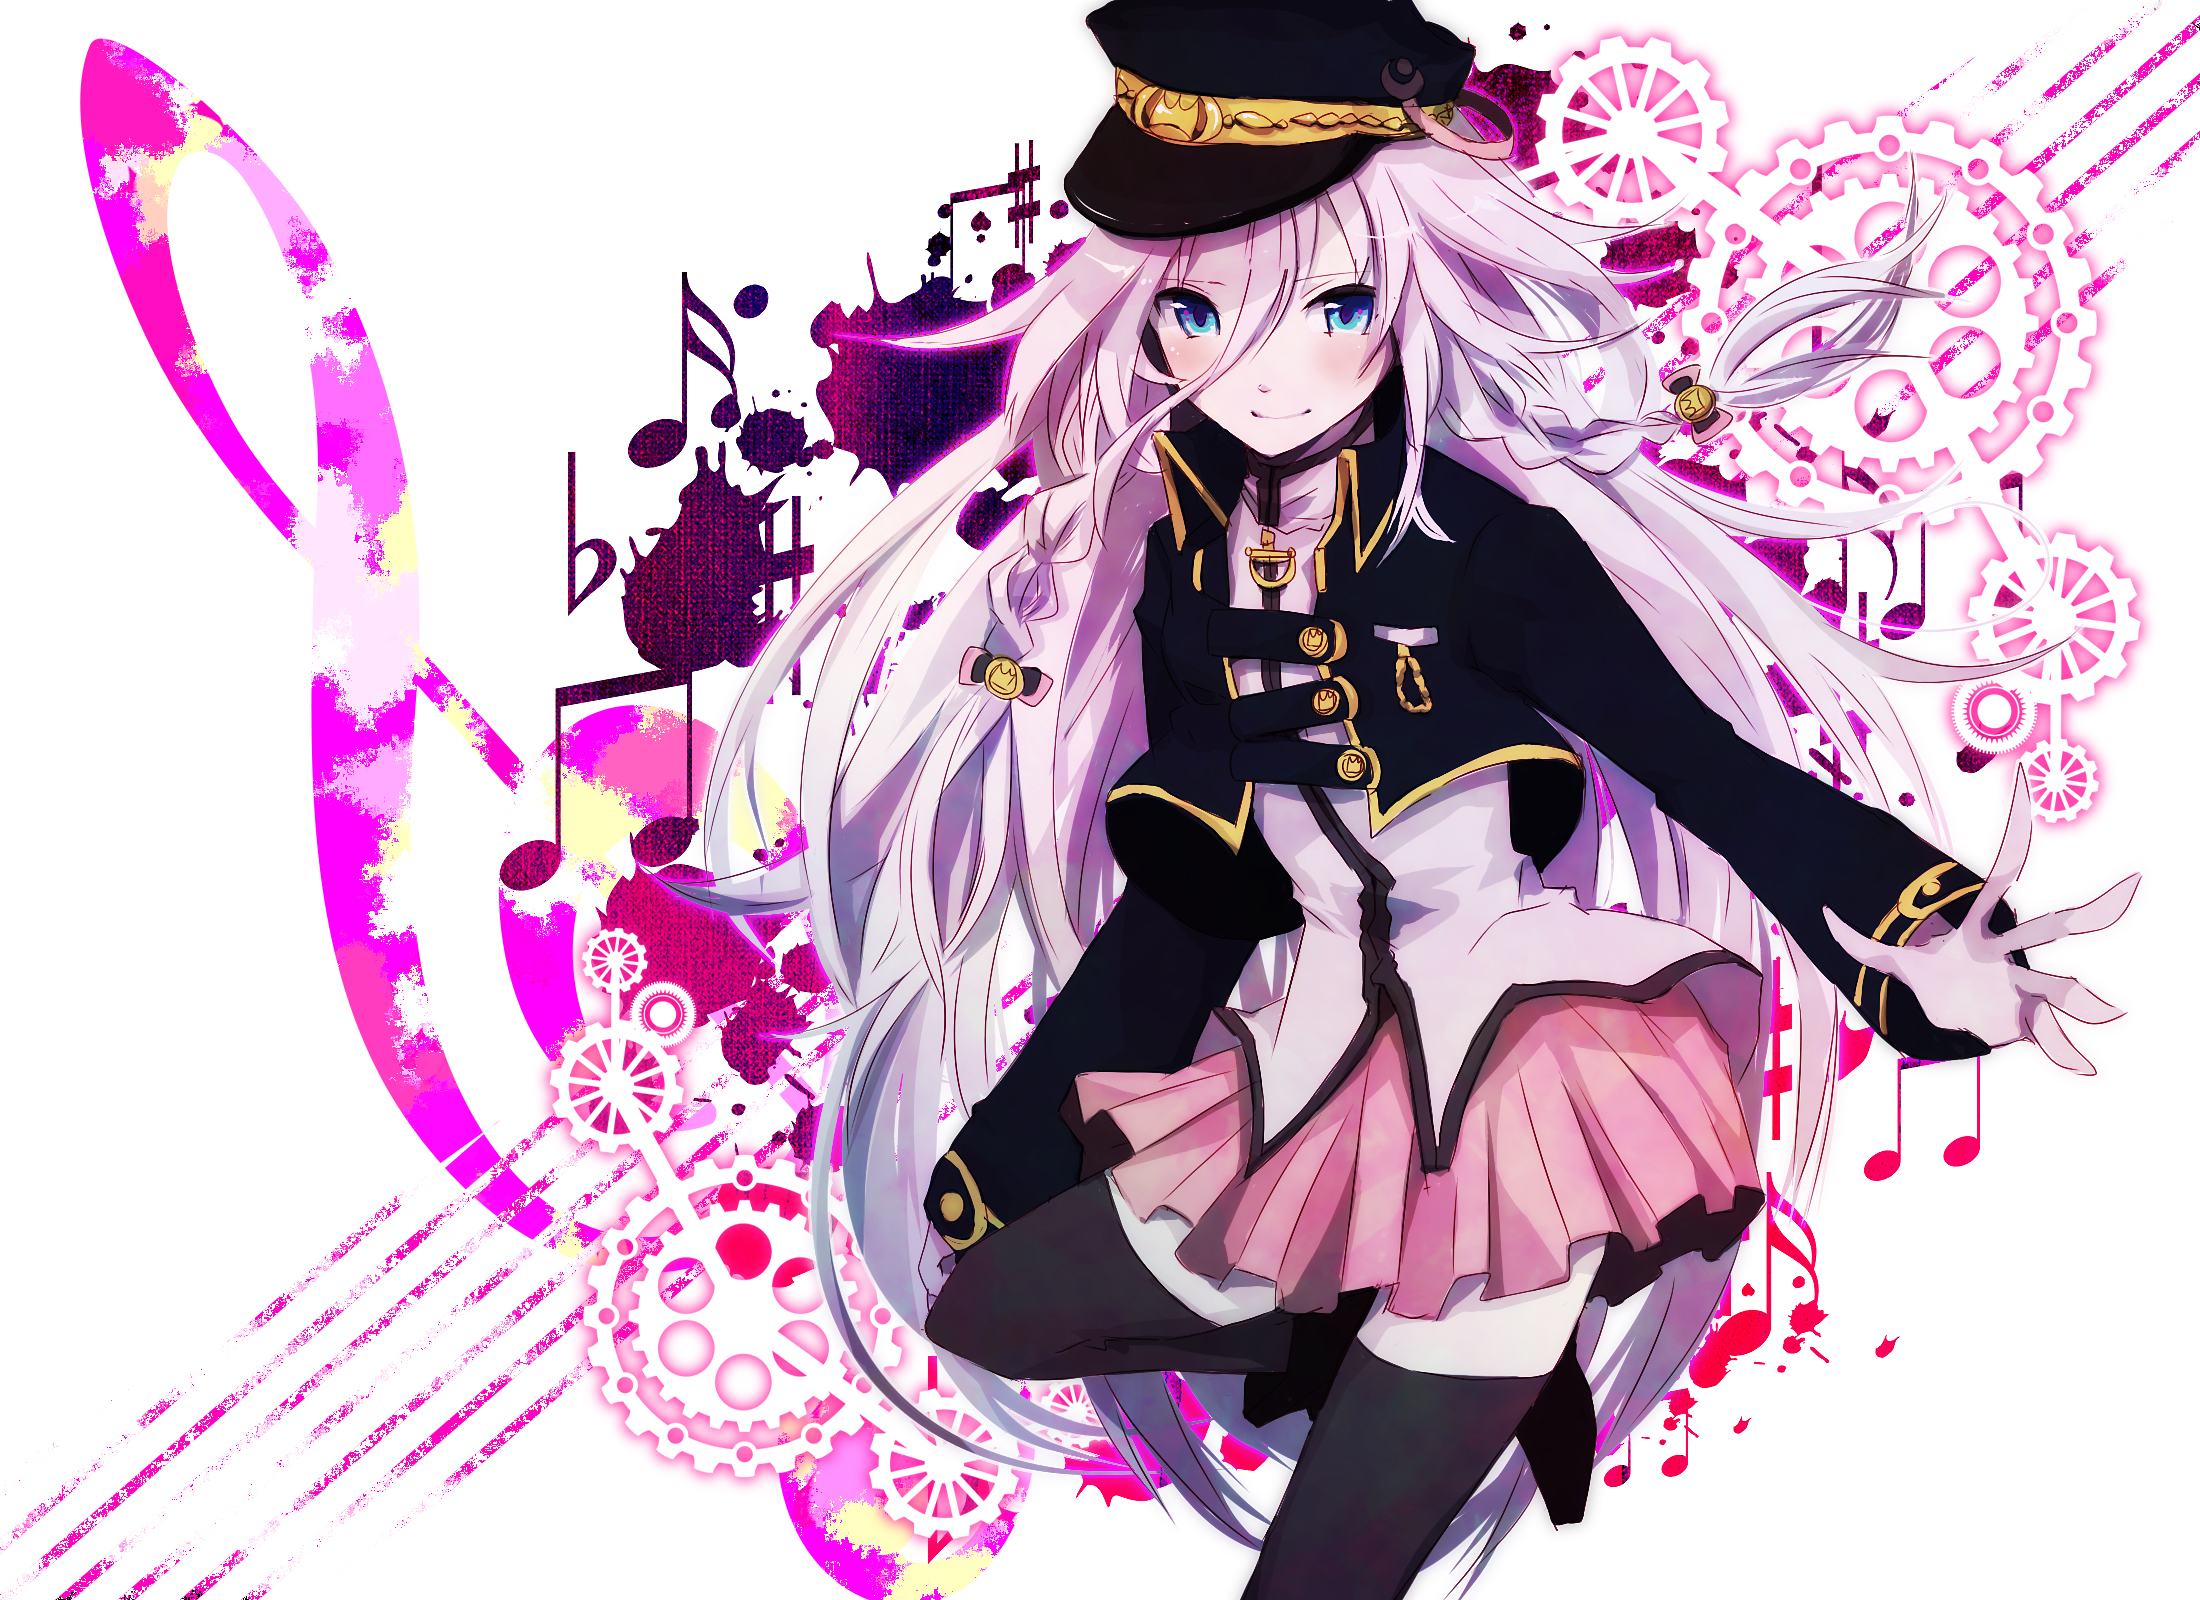 Popular Ia (Vocaloid) Image for Phone